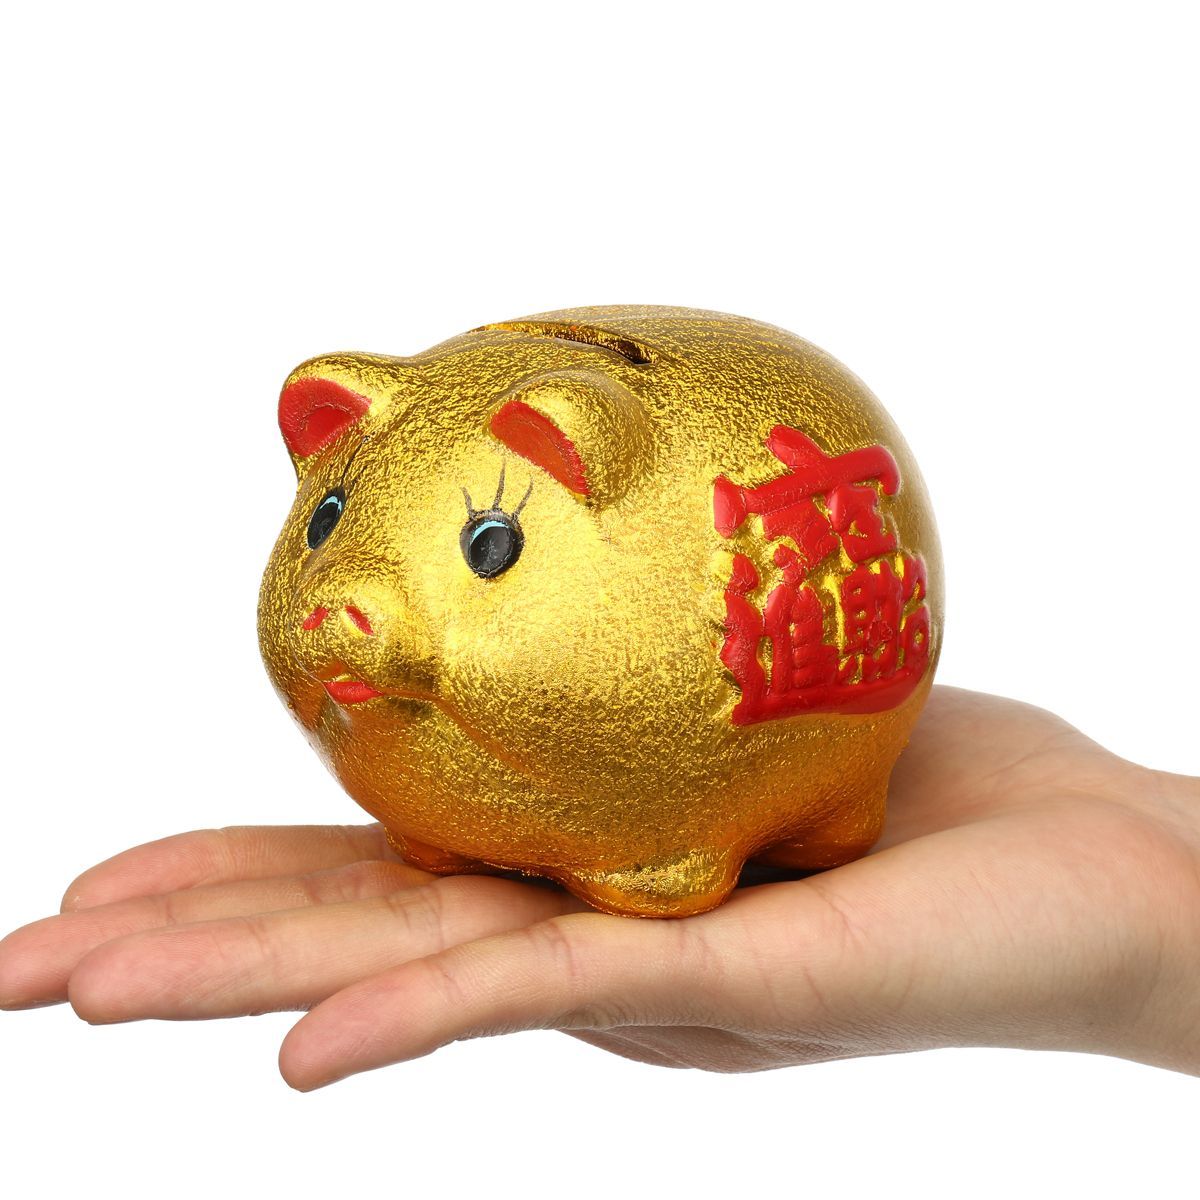 5-Gold-Ceramic-Piggy-Bank-Mini-Cute-Pig-Children-Coin-Collection-Gift-Decorations-1555224